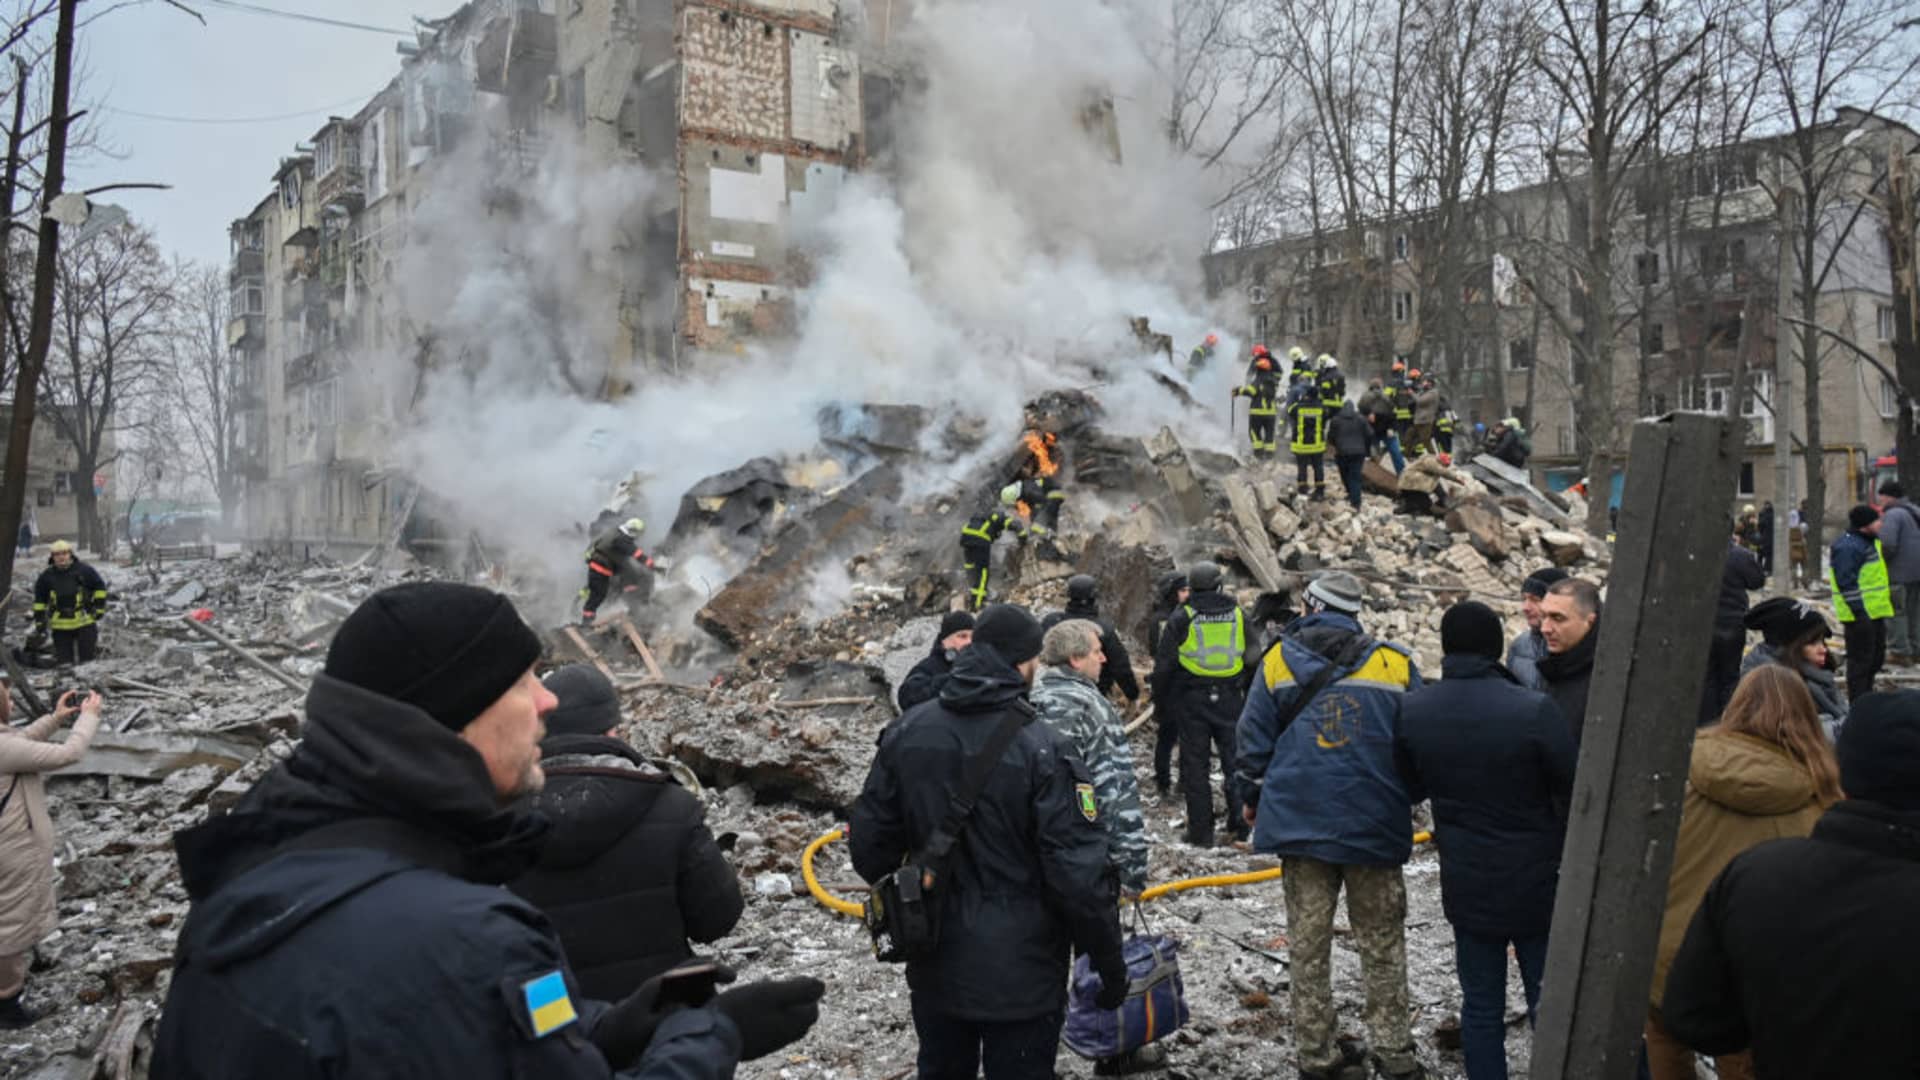 Ukrainian rescue and emergency workers attend the site of a missile attack in Kharkiv on January 23, 2024. Dozens of people were injured and two killed following an overnight aerial barrage by Russian forces targeting the Ukrainian capital Kyiv and the second-largest city Kharkiv, officials said on January 23, 2024. (Photo by SERGEY BOBOK / AFP) (Photo by SERGEY BOBOK/AFP via Getty Images)